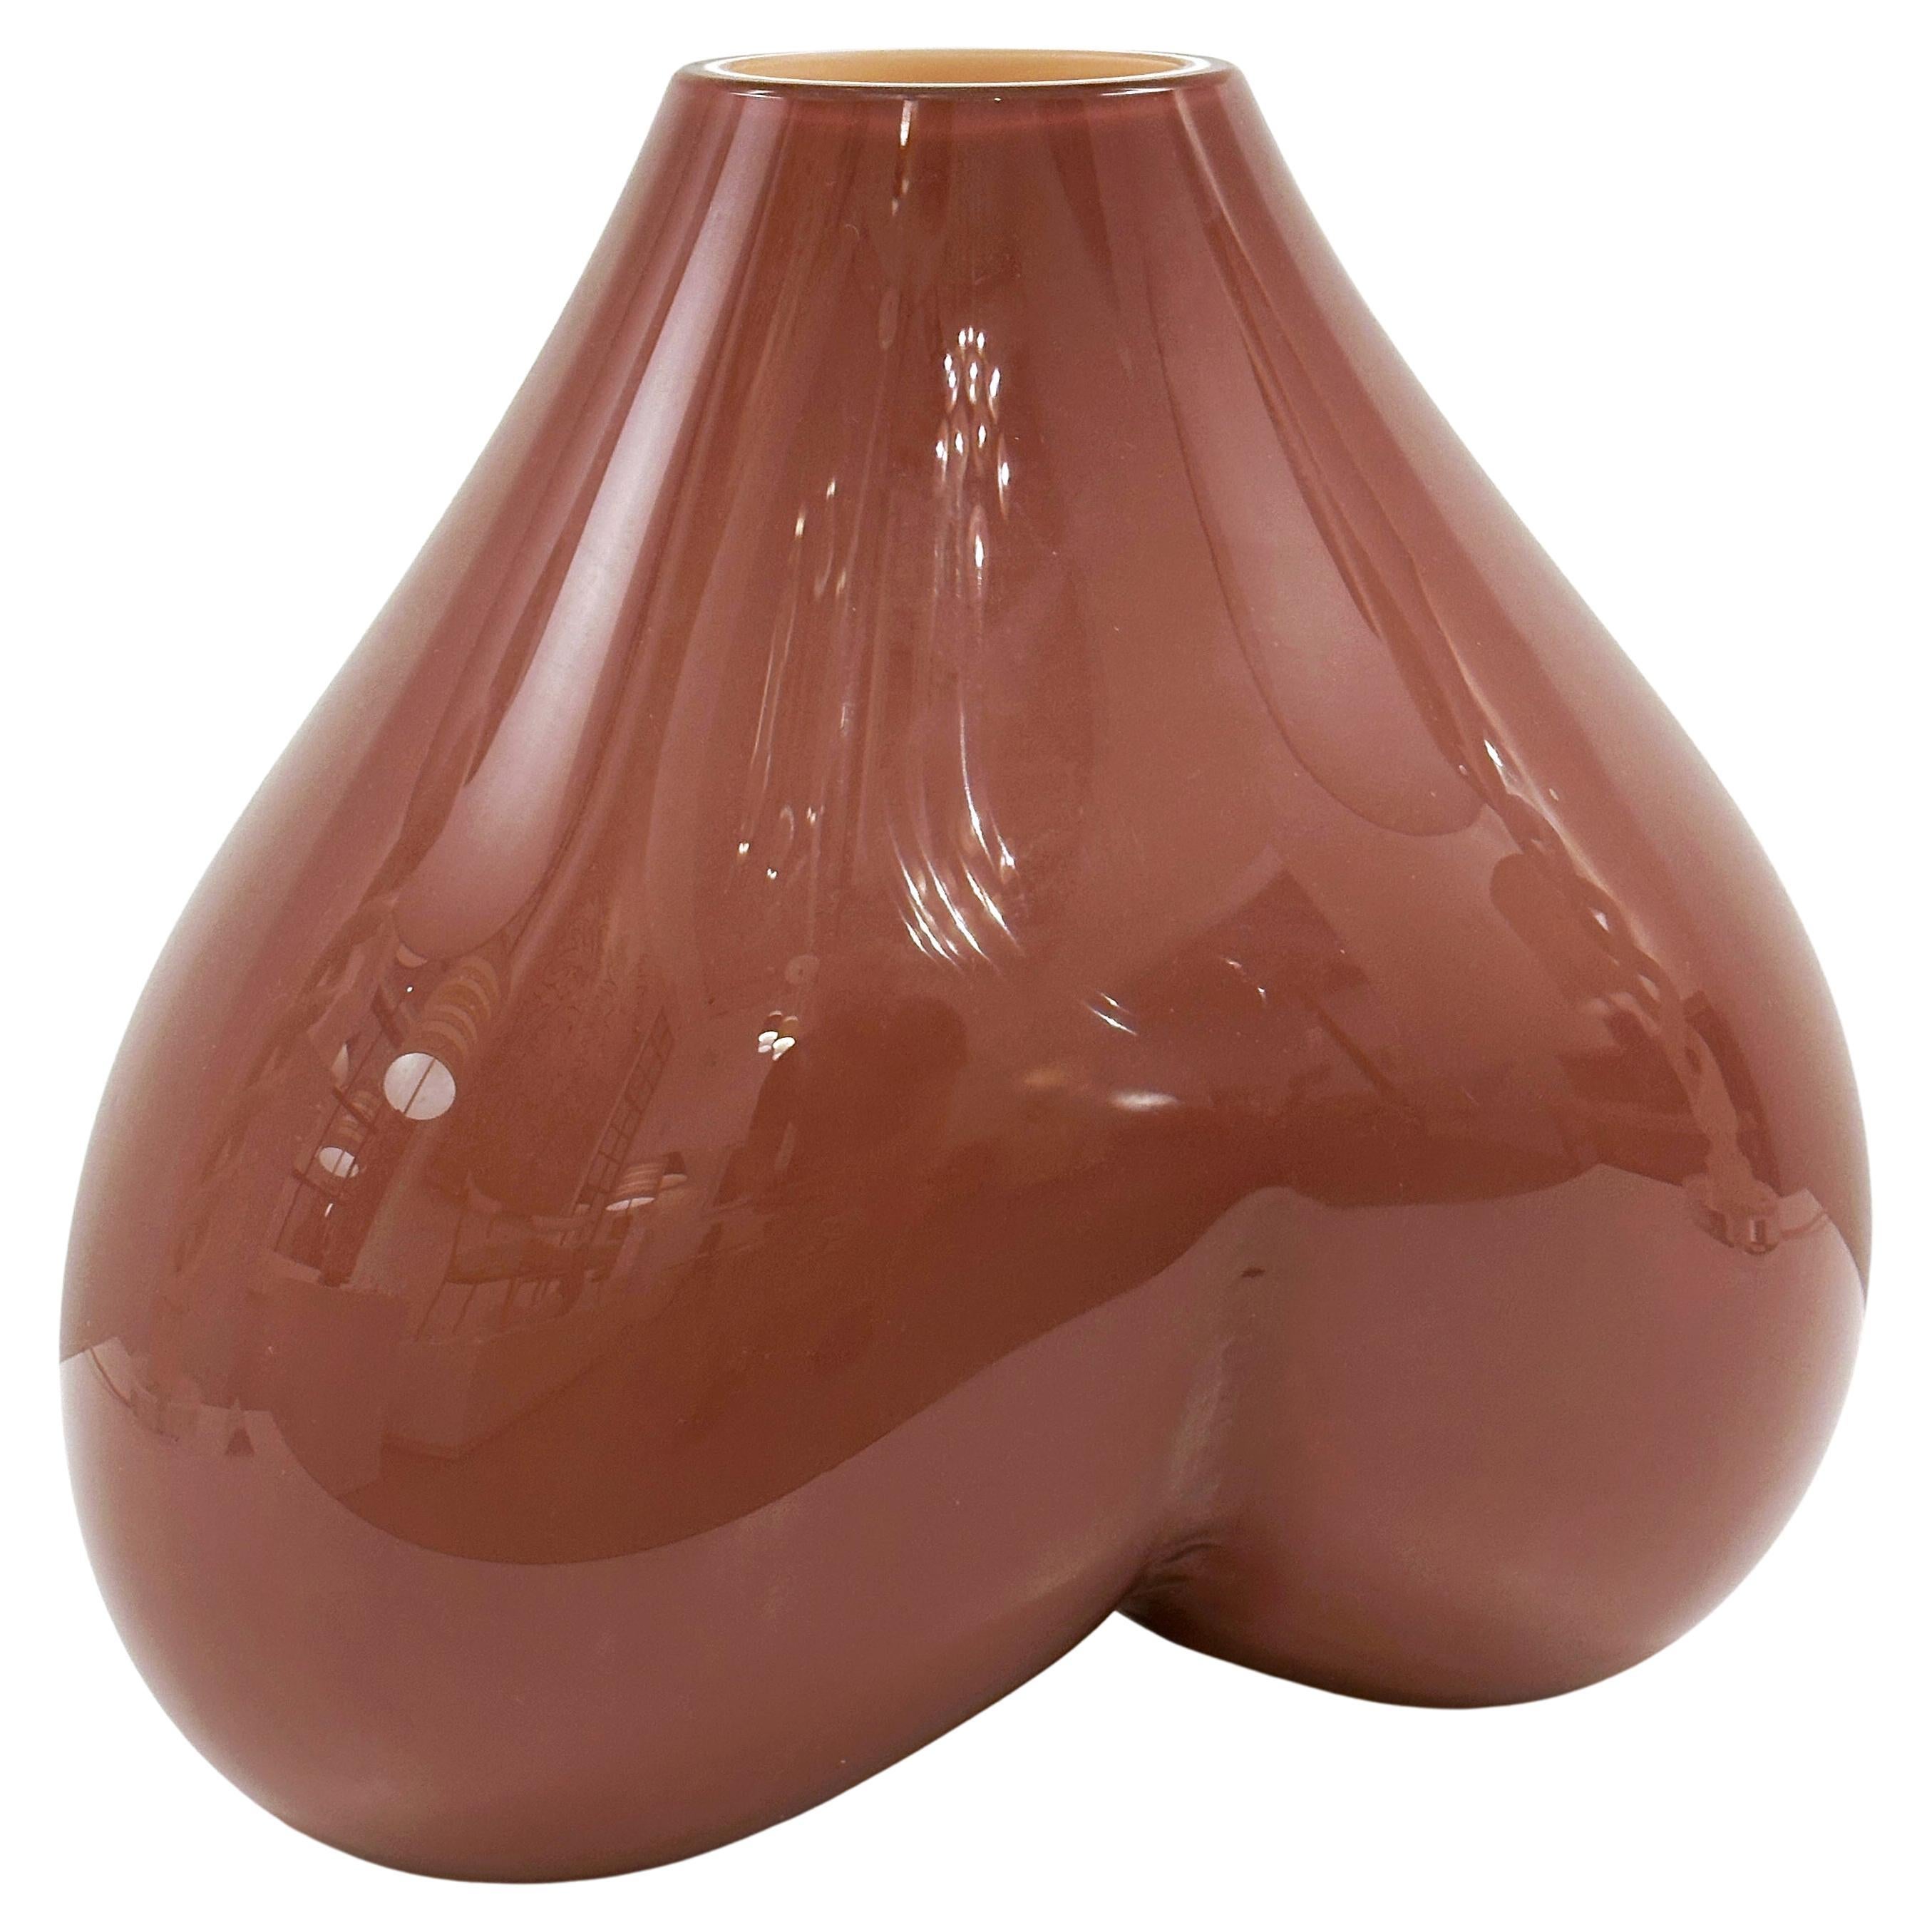 Marre Moerel Anatomy Series Signed Edition Gluteus Murano Glass Vase Covo, Italy For Sale